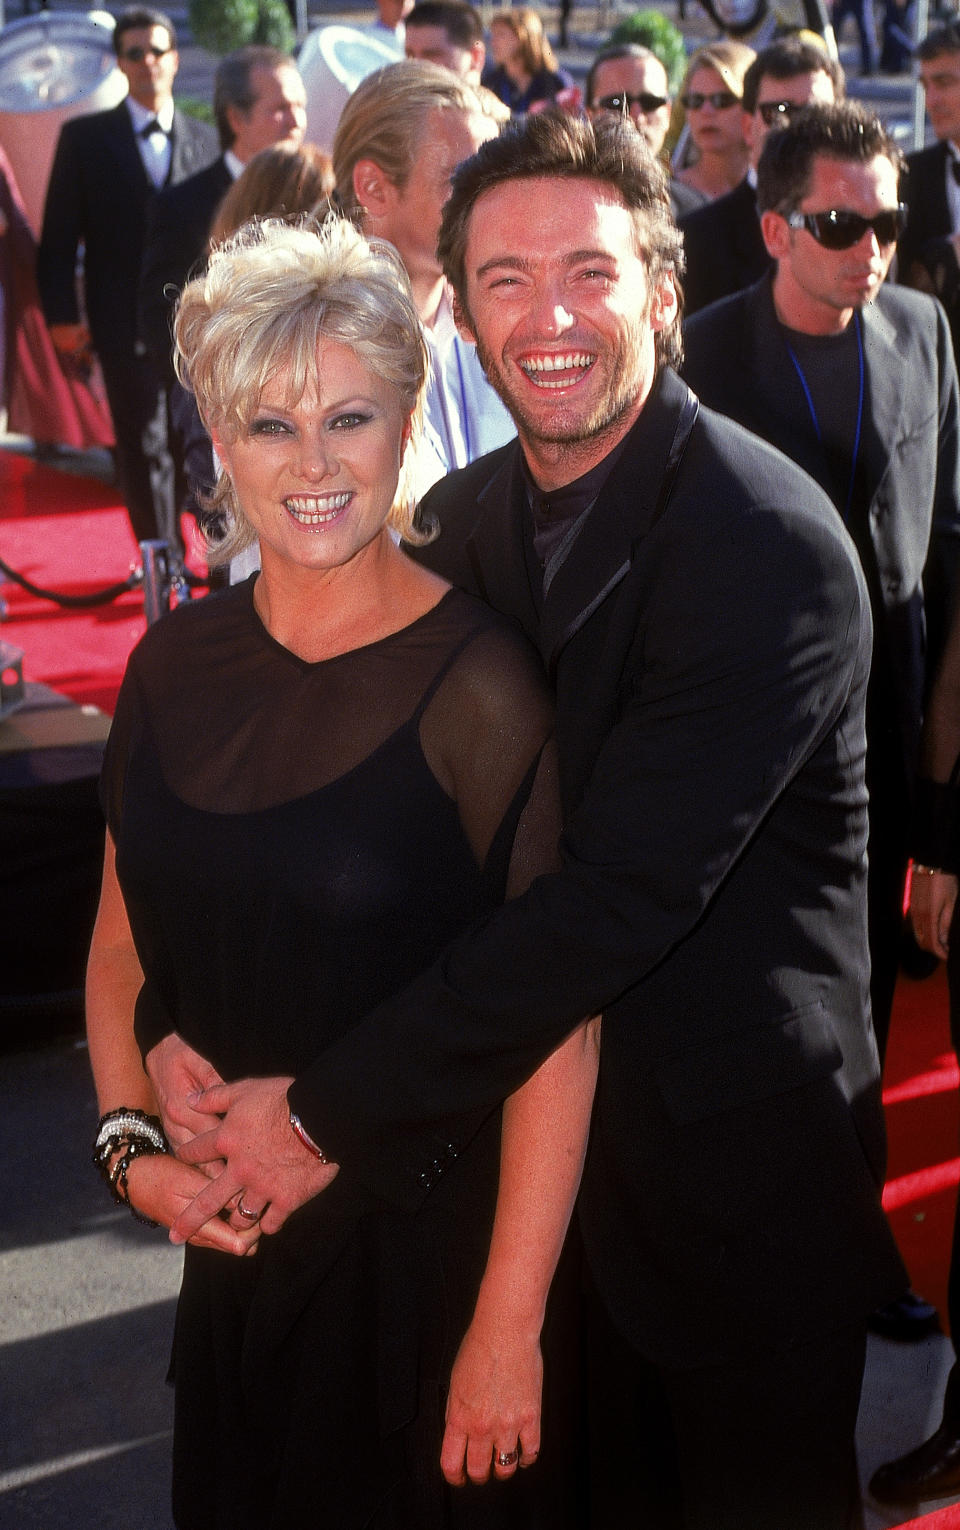 SYDNEY, AUSTRALIA - SEPTEMBER 15:  Actor Hugh Jackman (R) and his wife Deborra-Lee Furness attend the Fox Studios Gala Opening held at the Fox Studios November 2, 1999 in Sydney, Australia. (Photo by Patrick Riviere/Getty Images)